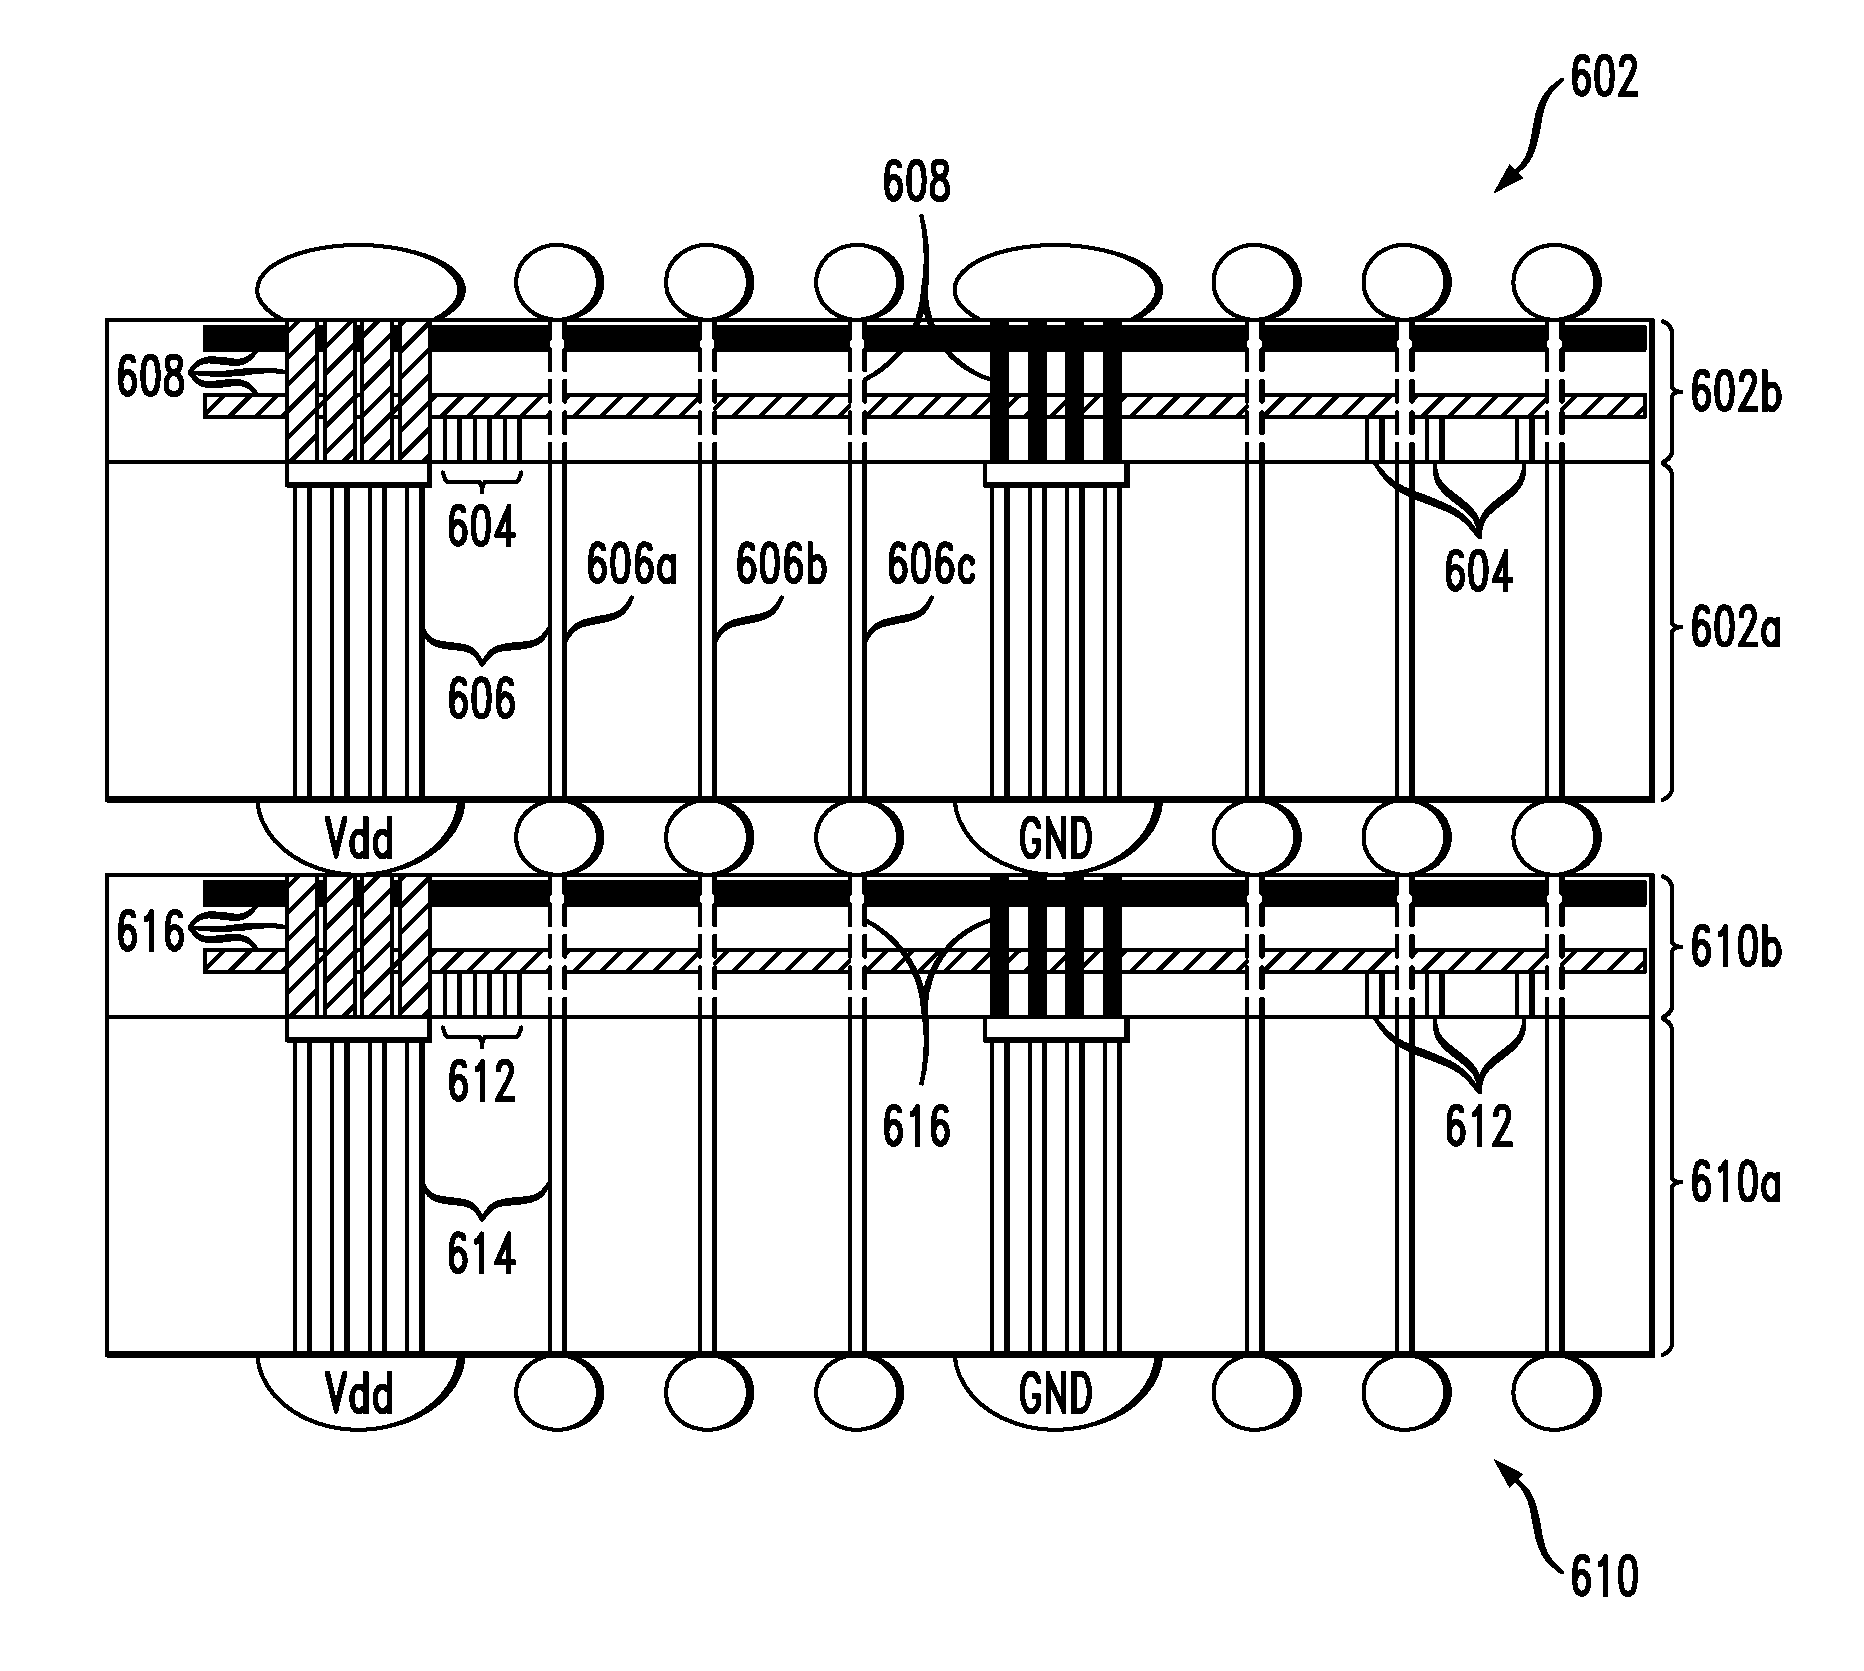 Three-dimensional silicon interposer for low voltage low power systems